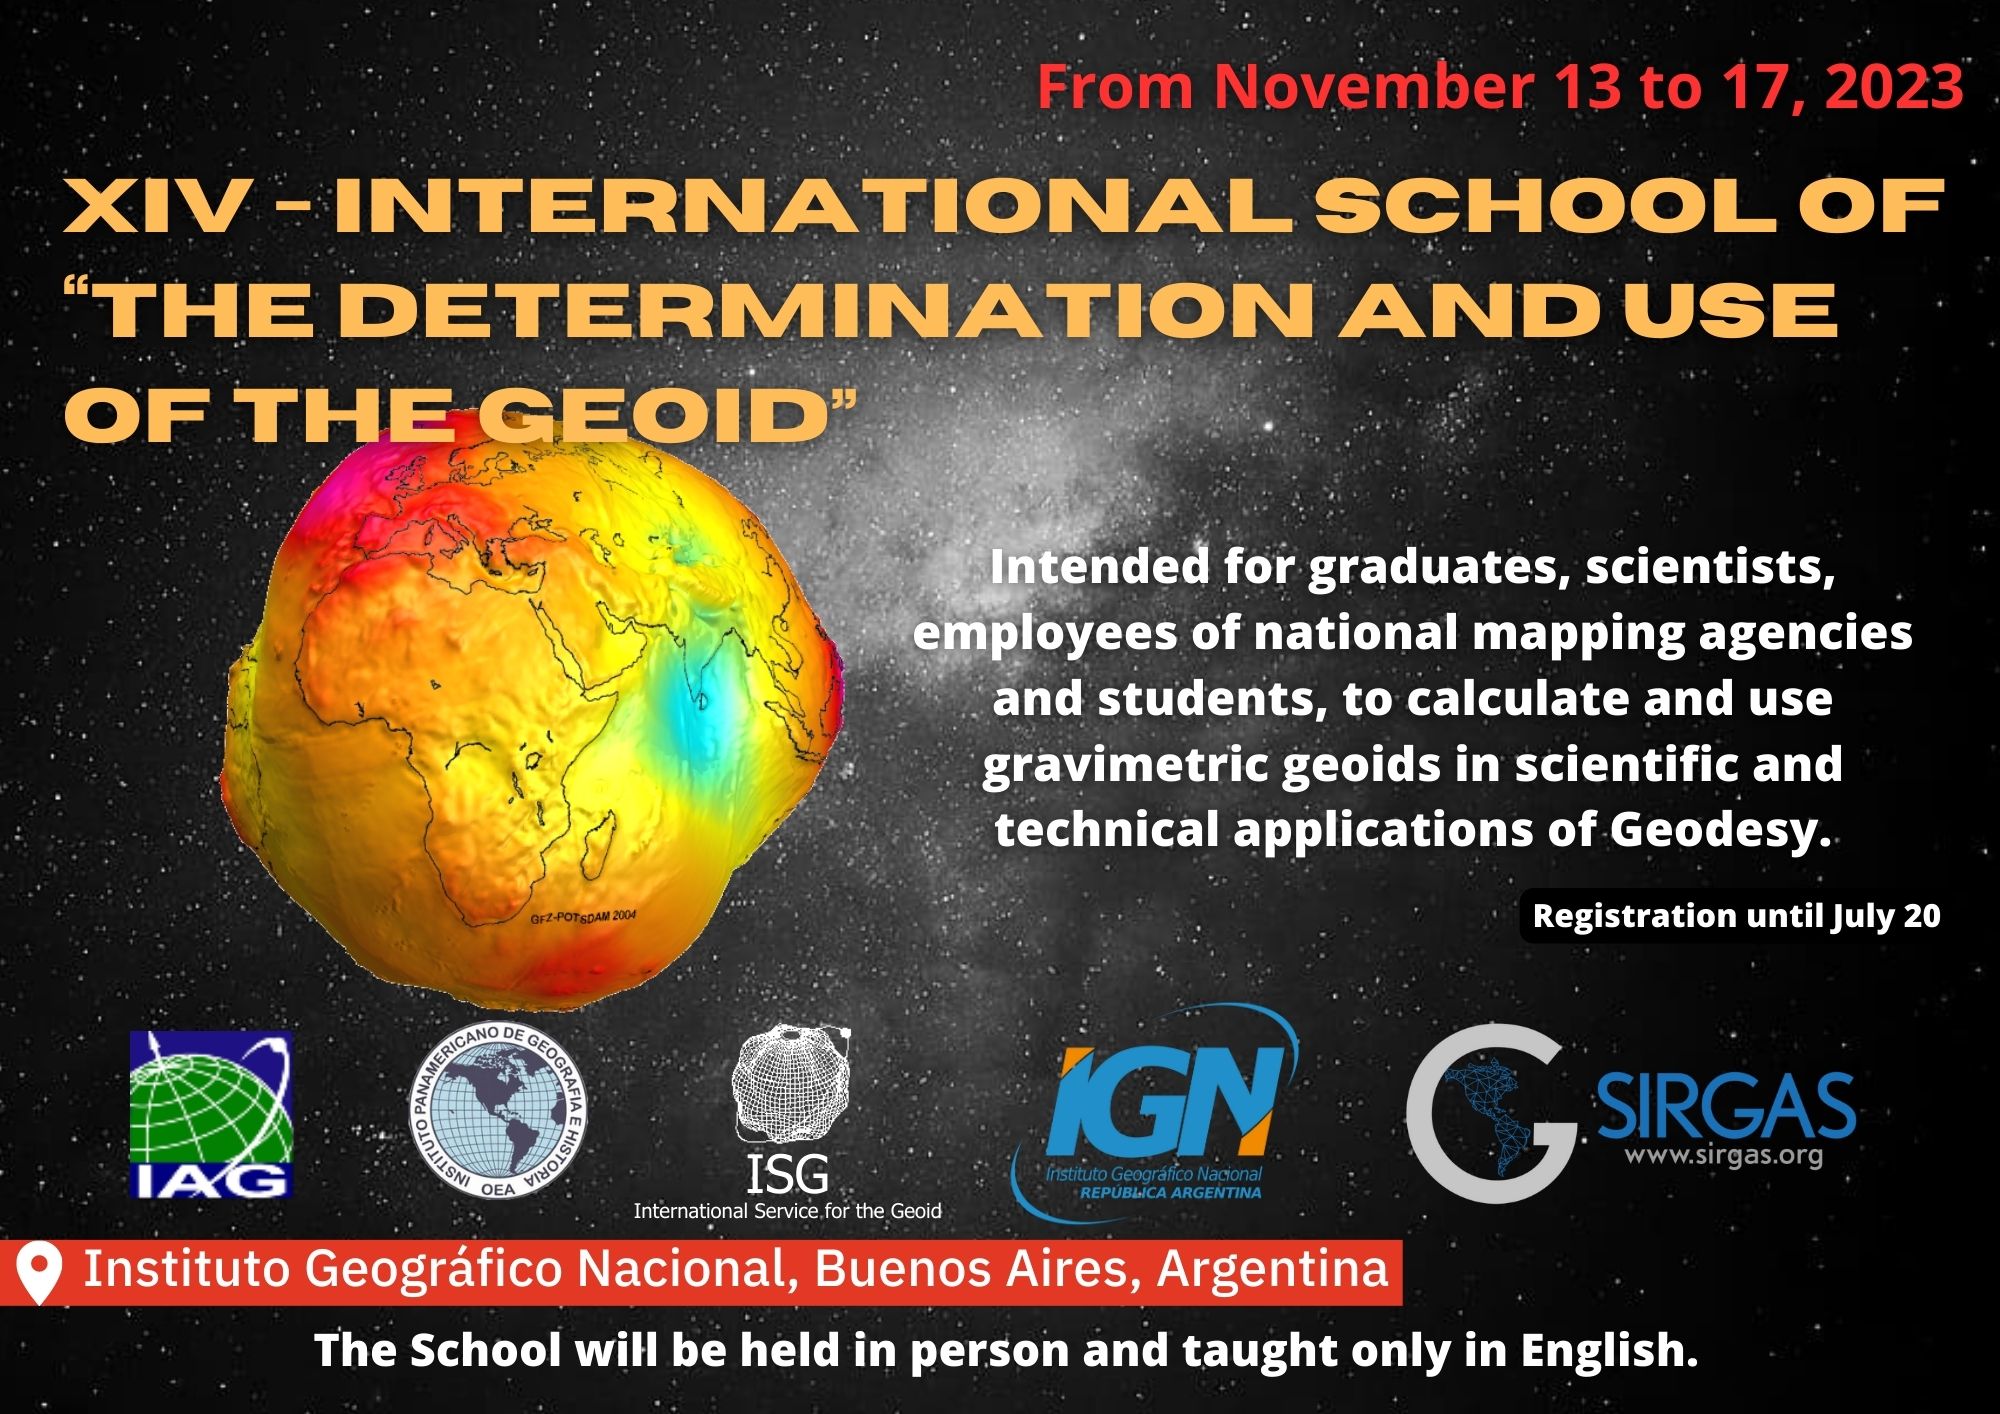 14th International School on “The Determination and Use of the Geoid”